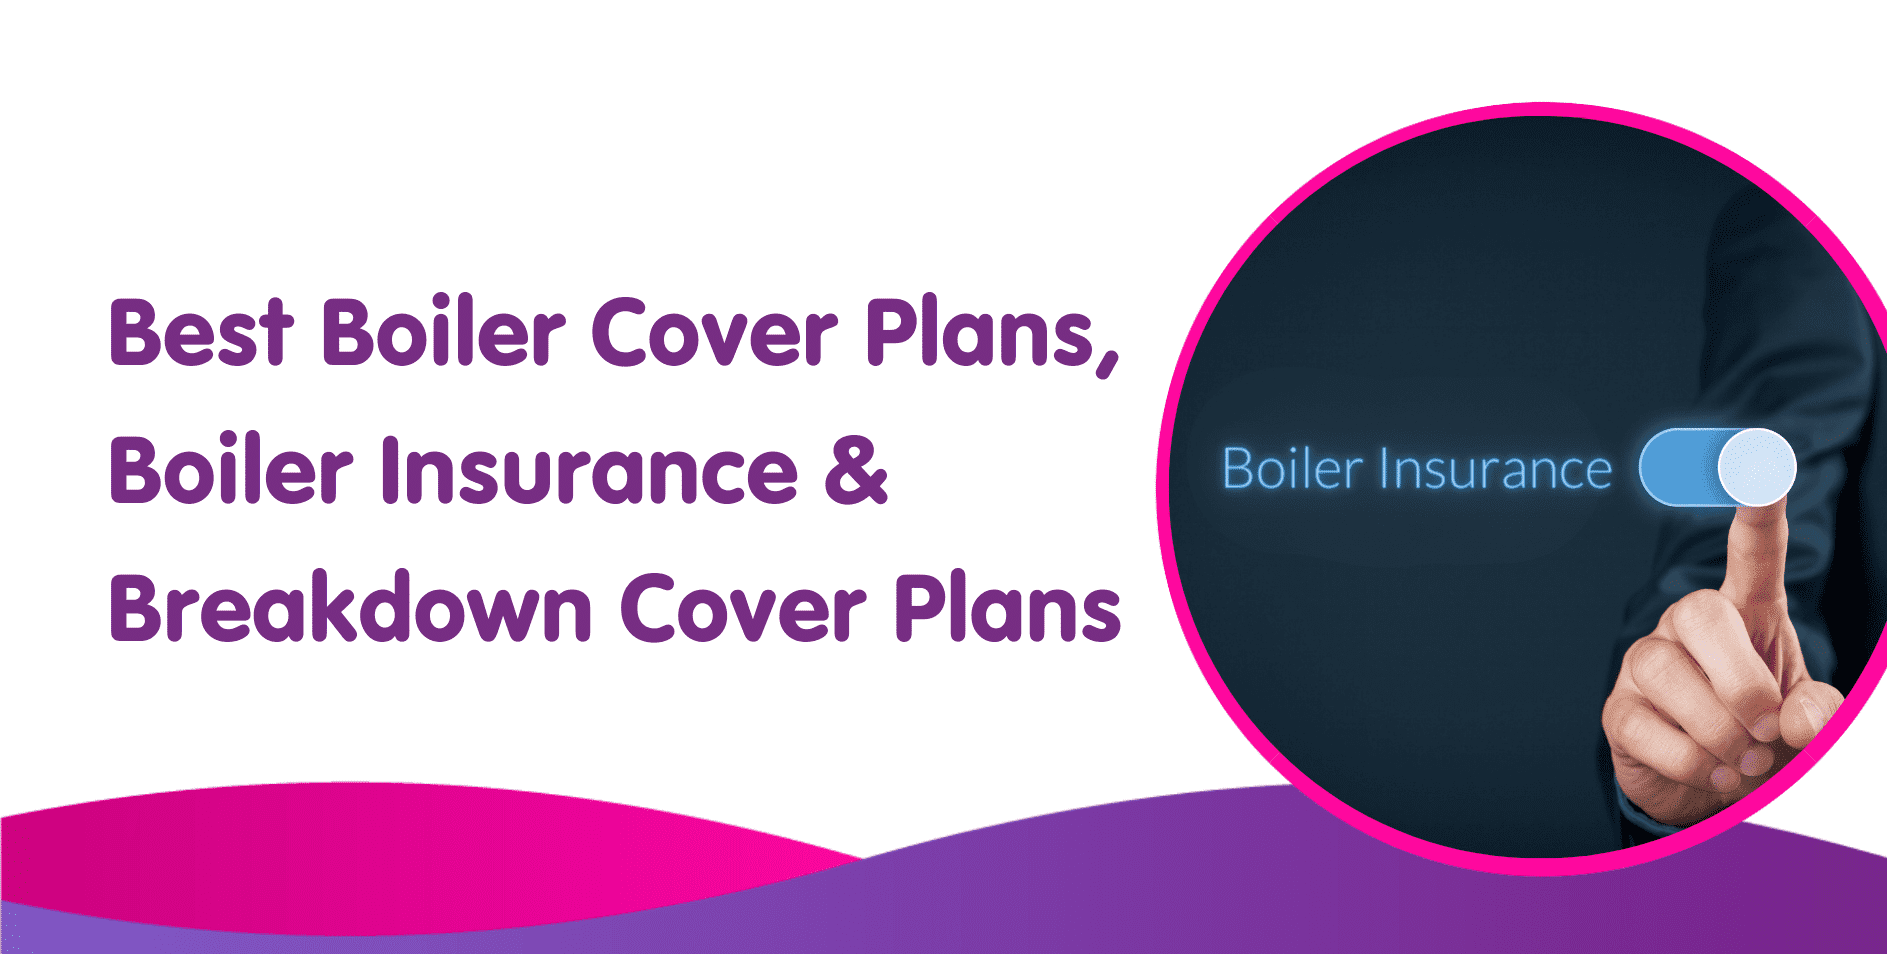 Which Are The Best Boiler Cover, Insurance & Breakdown Cover Plans?